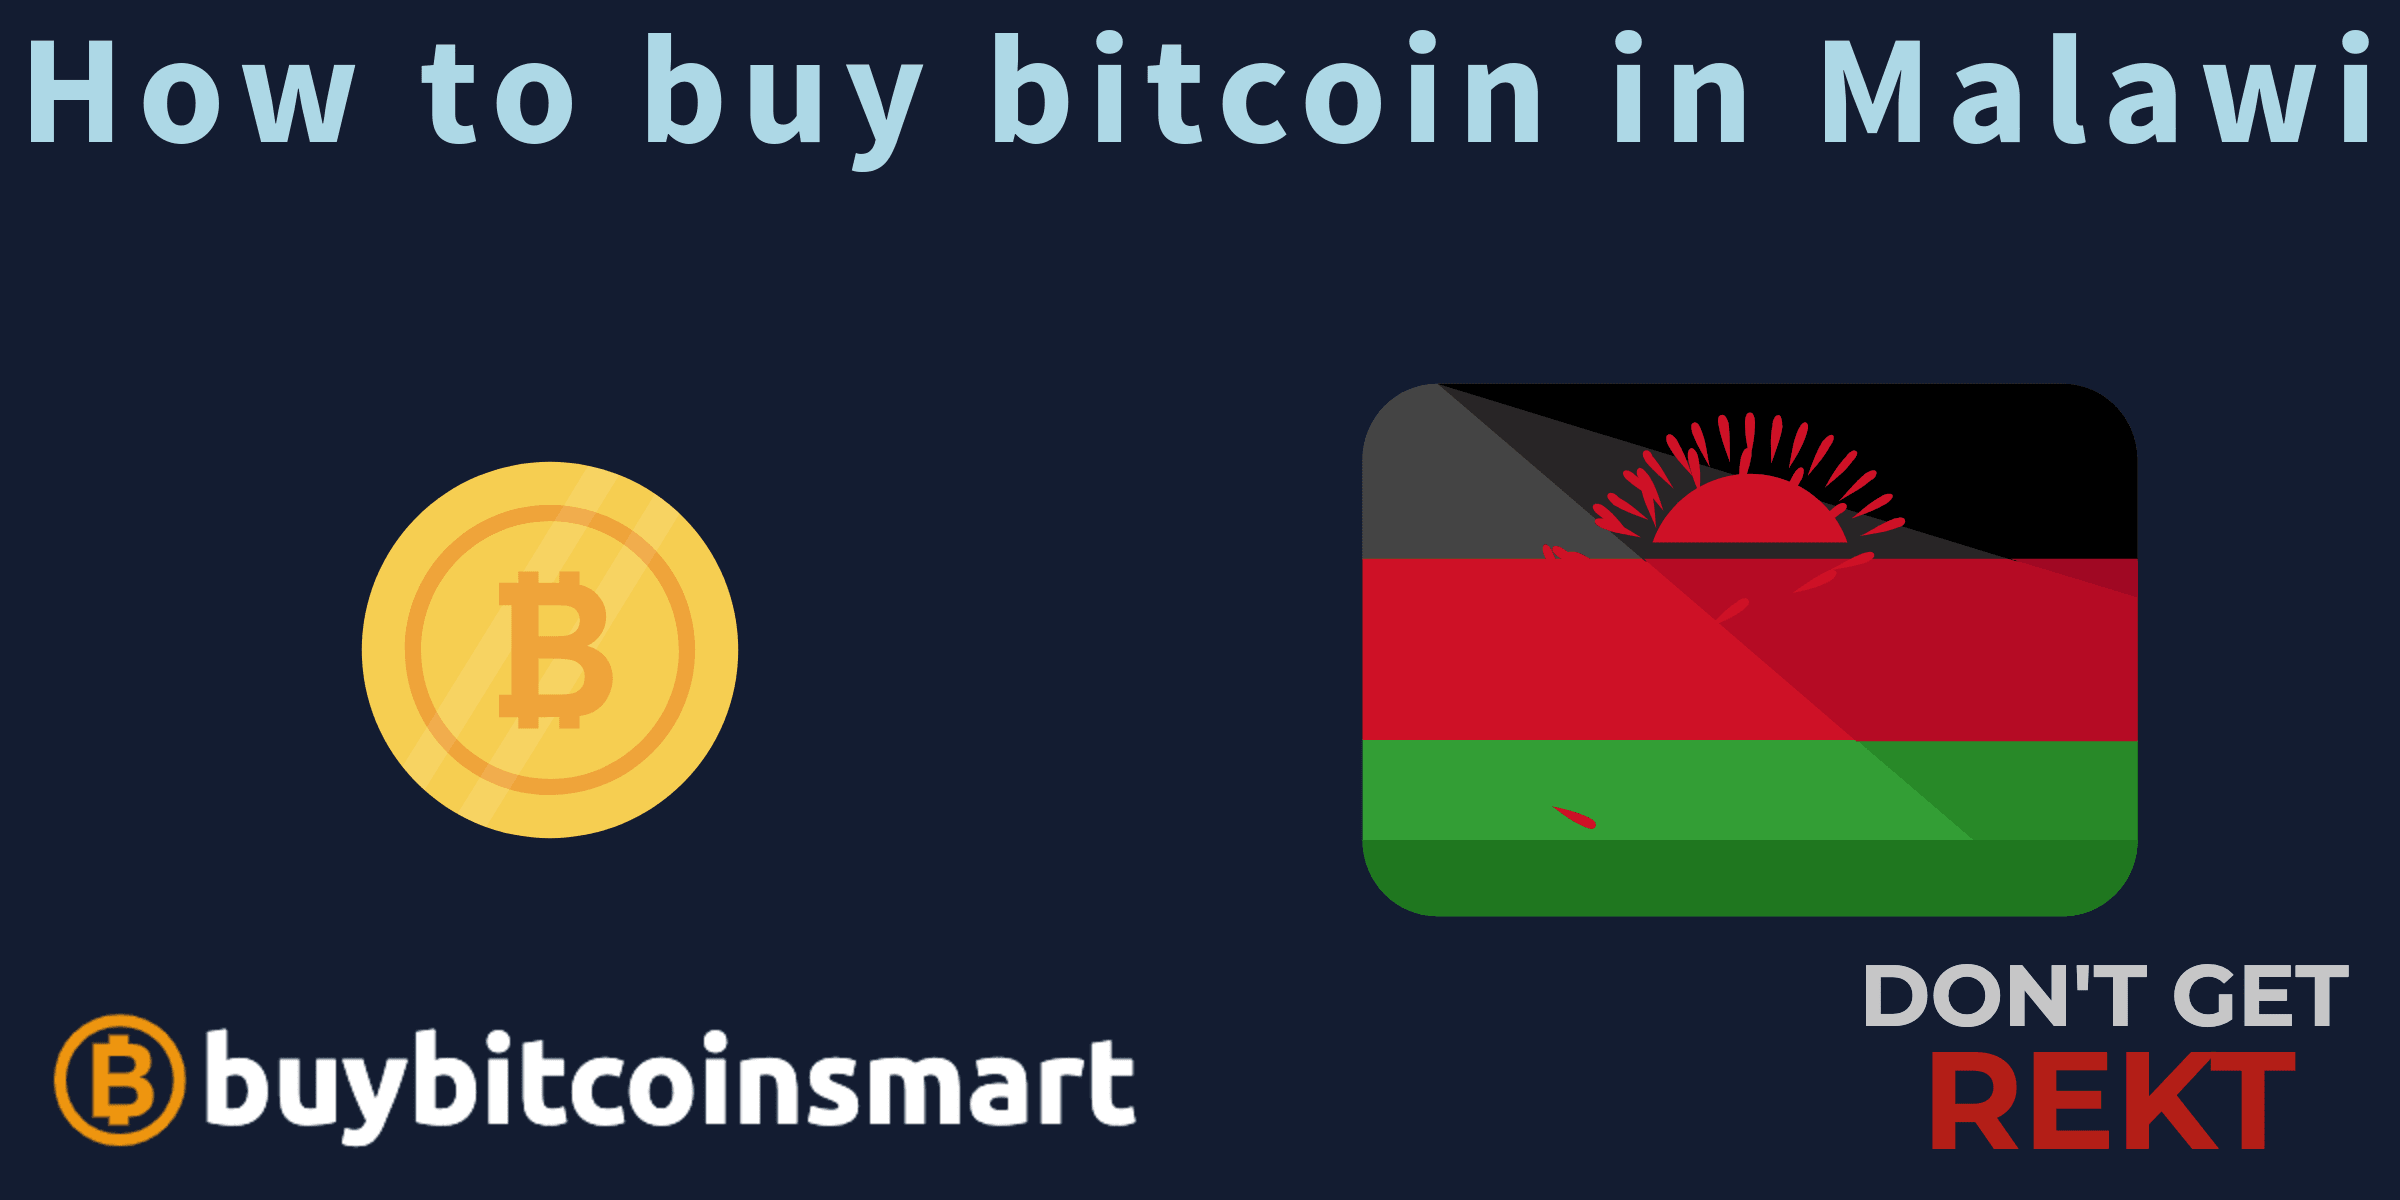 How to buy bitcoin in Malawi